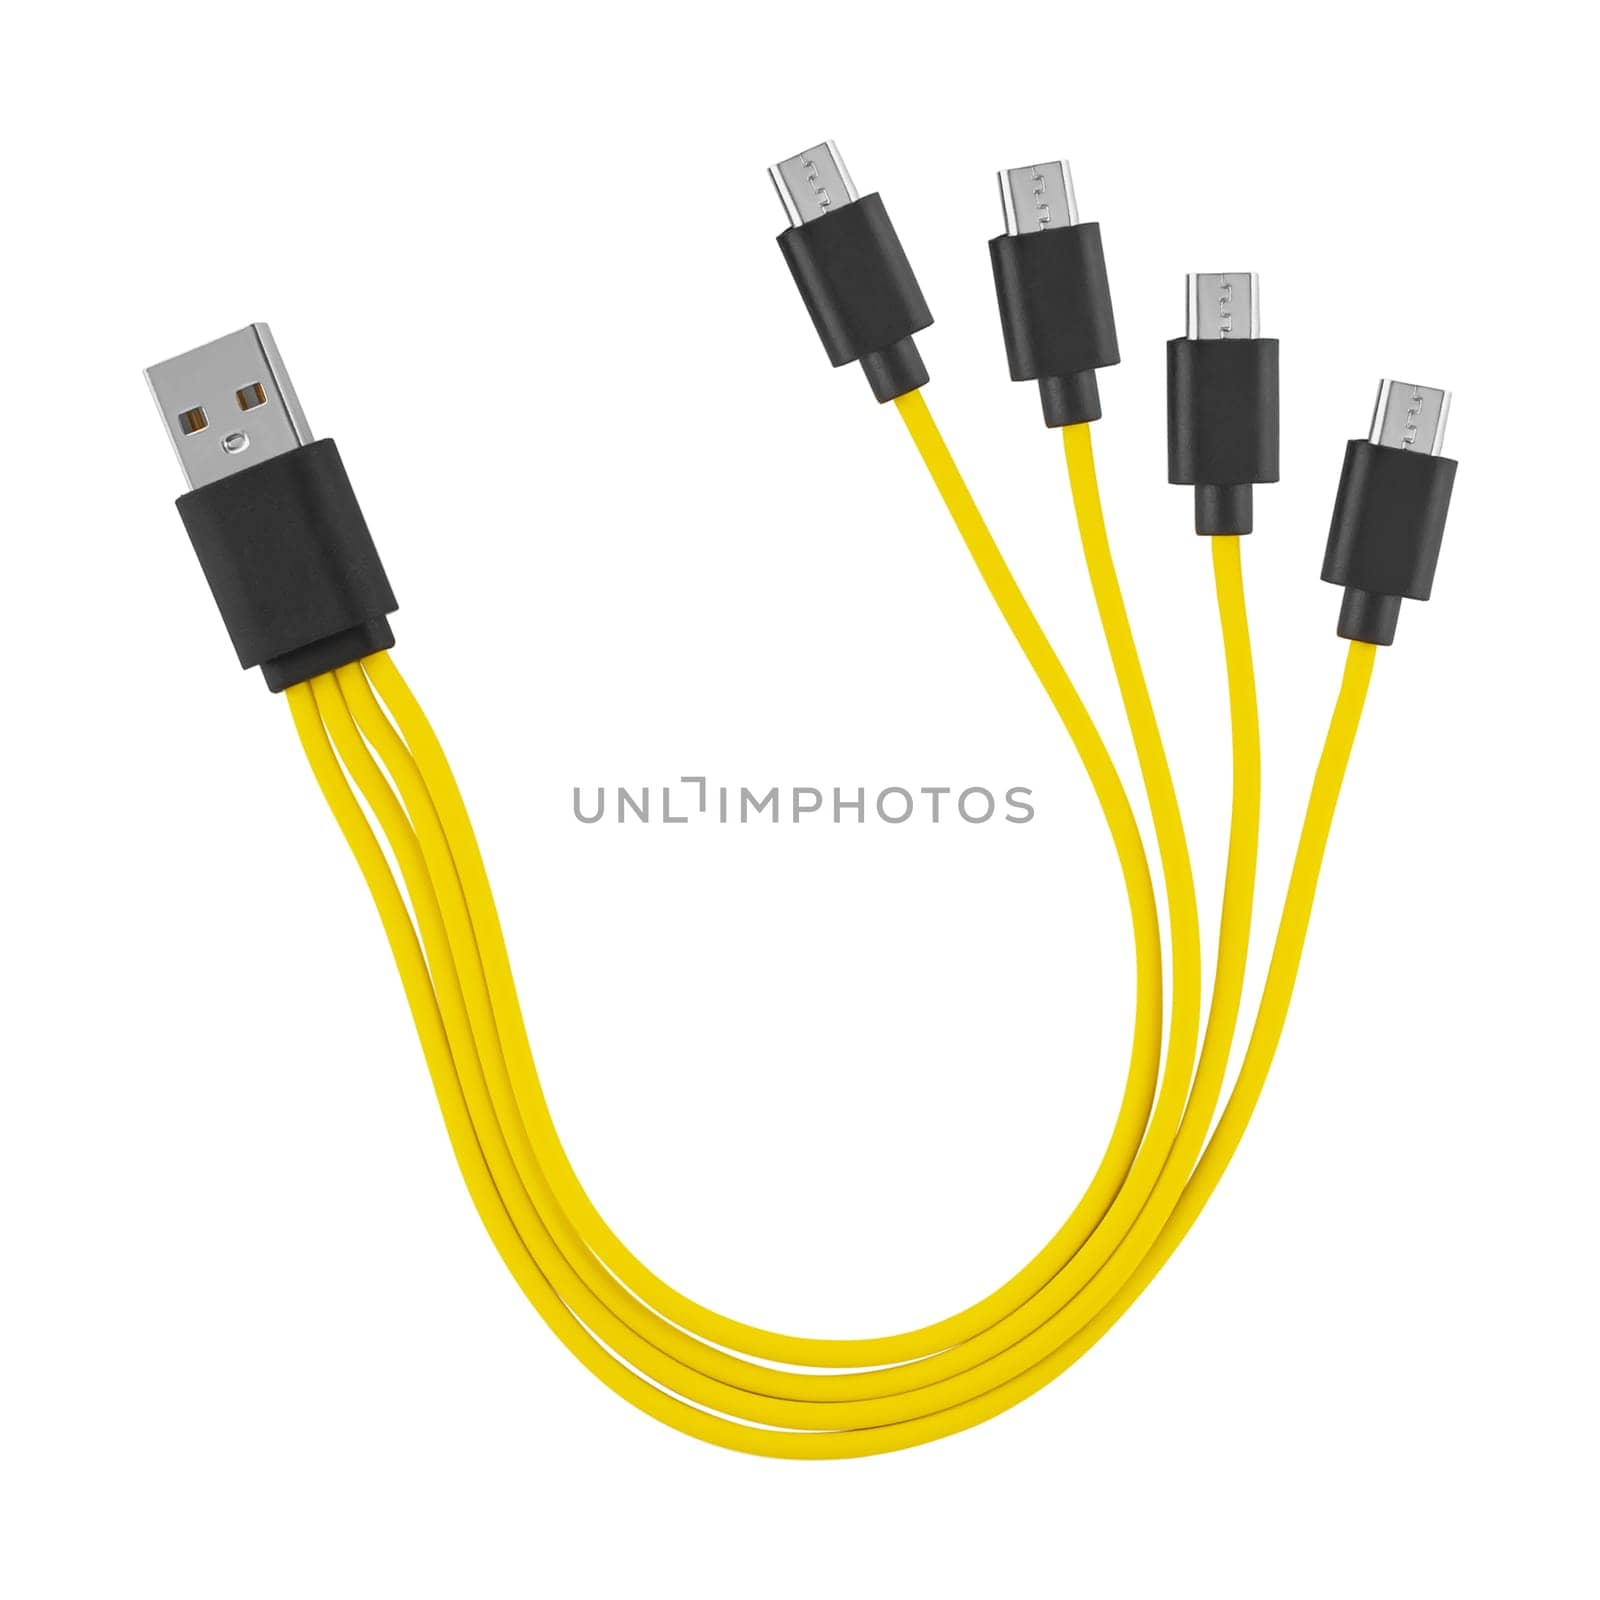 Cable with USB and micro USB connector, on white background in insulation by A_A